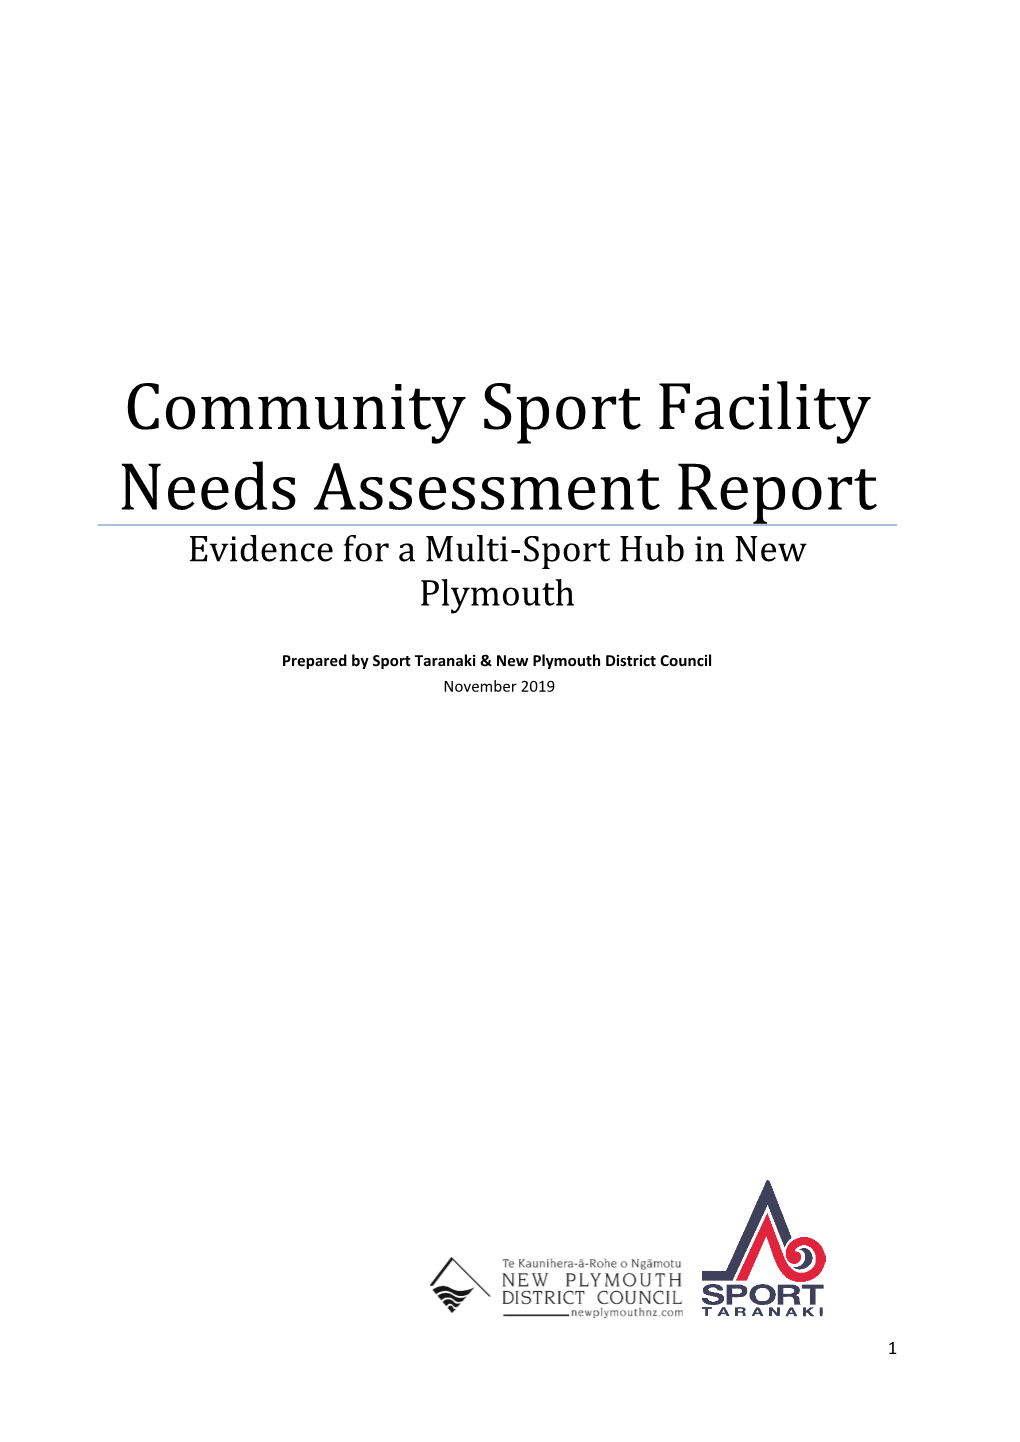 Community Sport Facility Needs Assessment Report Evidence for a Multi-Sport Hub in New Plymouth